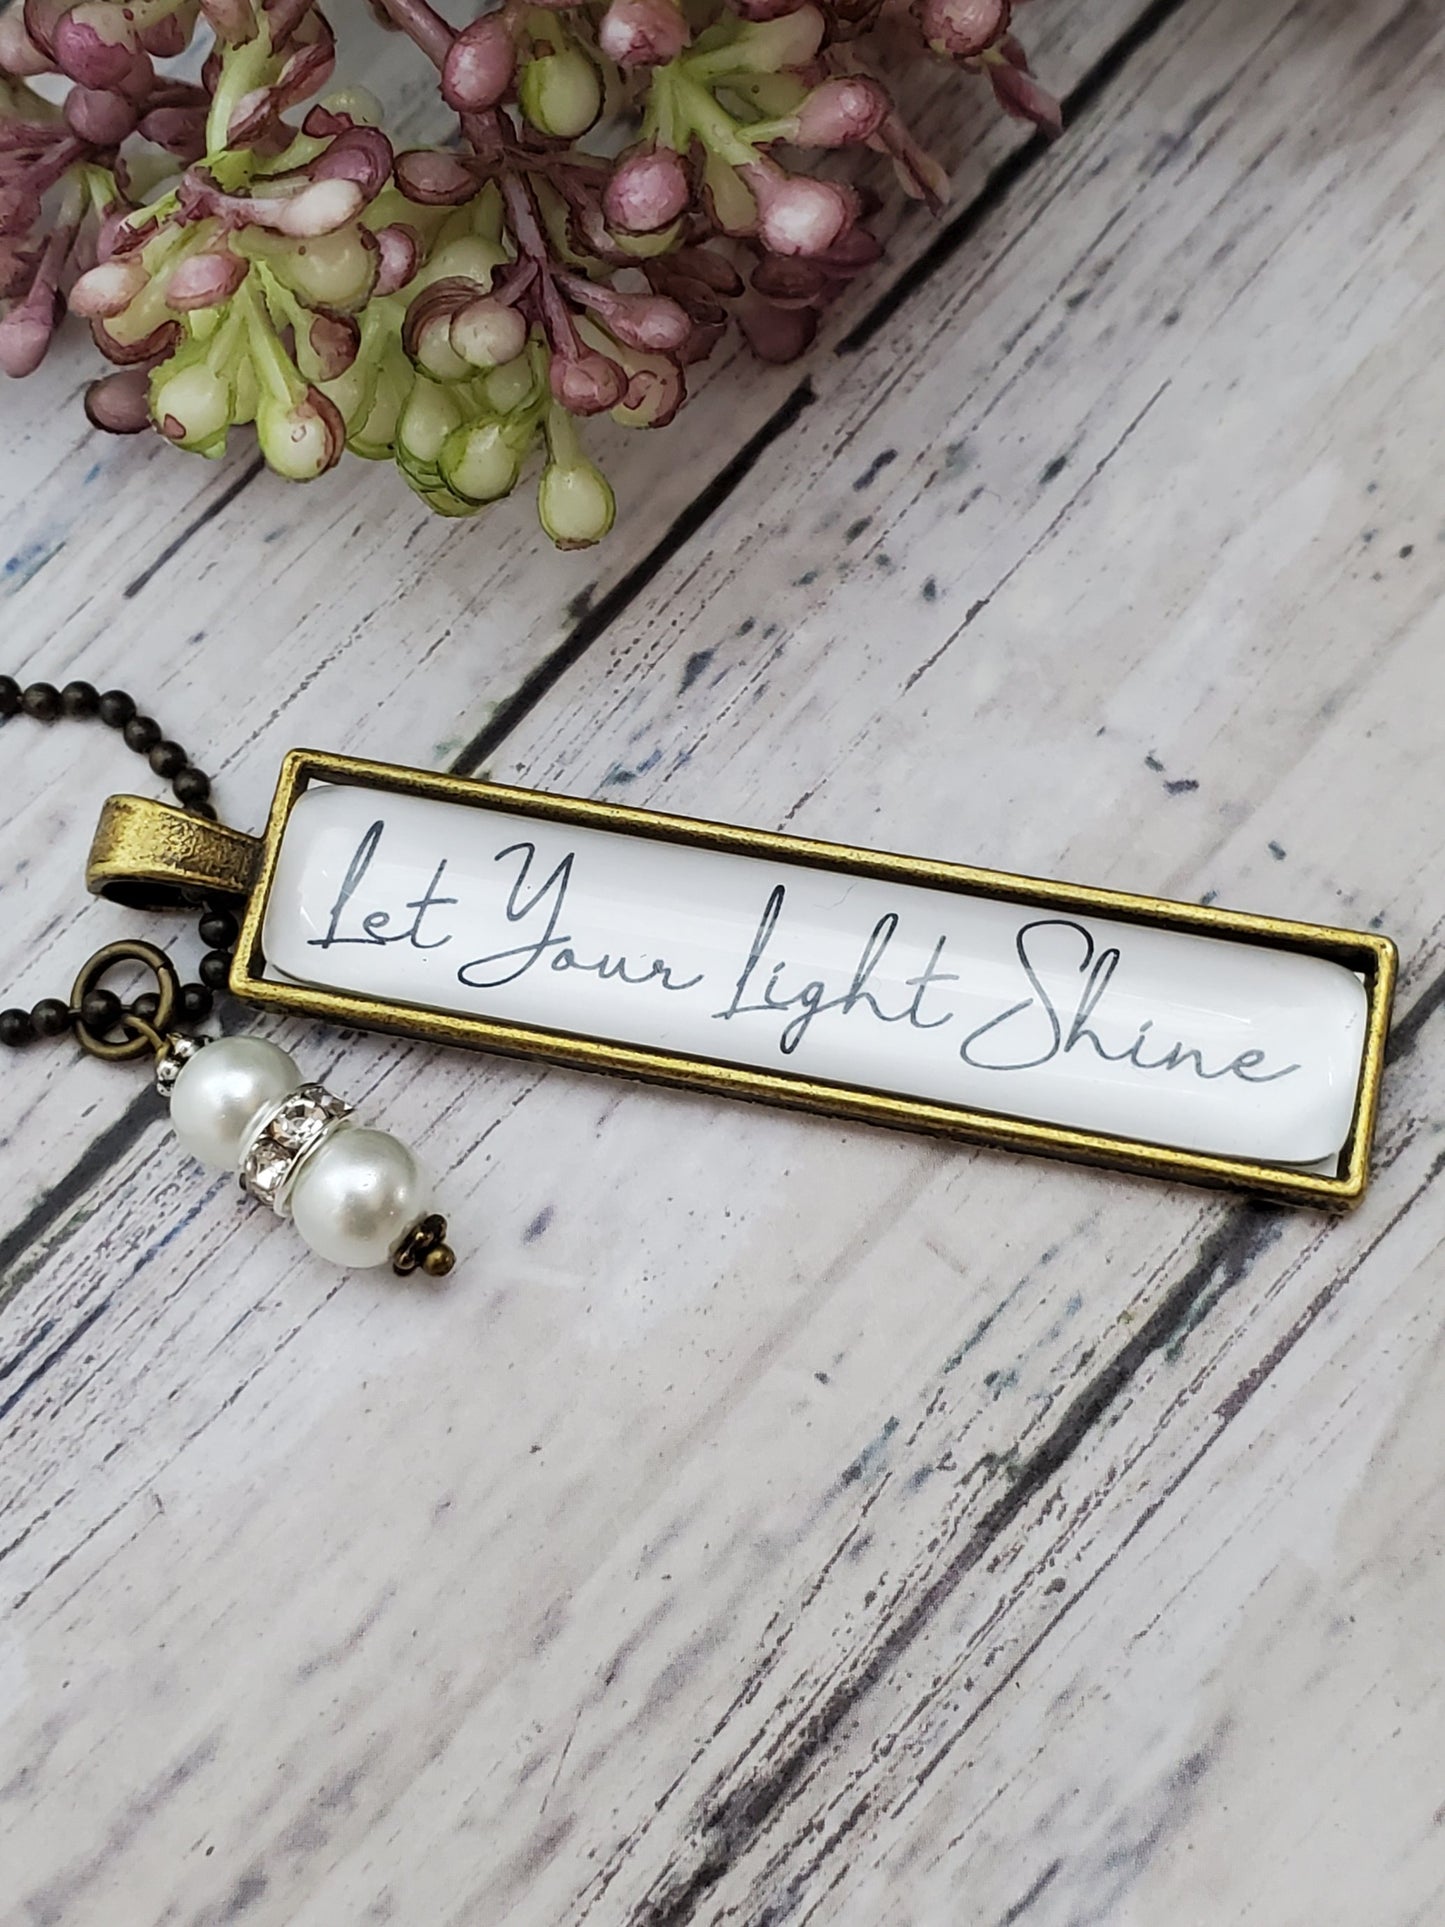 Inspirational Necklaces